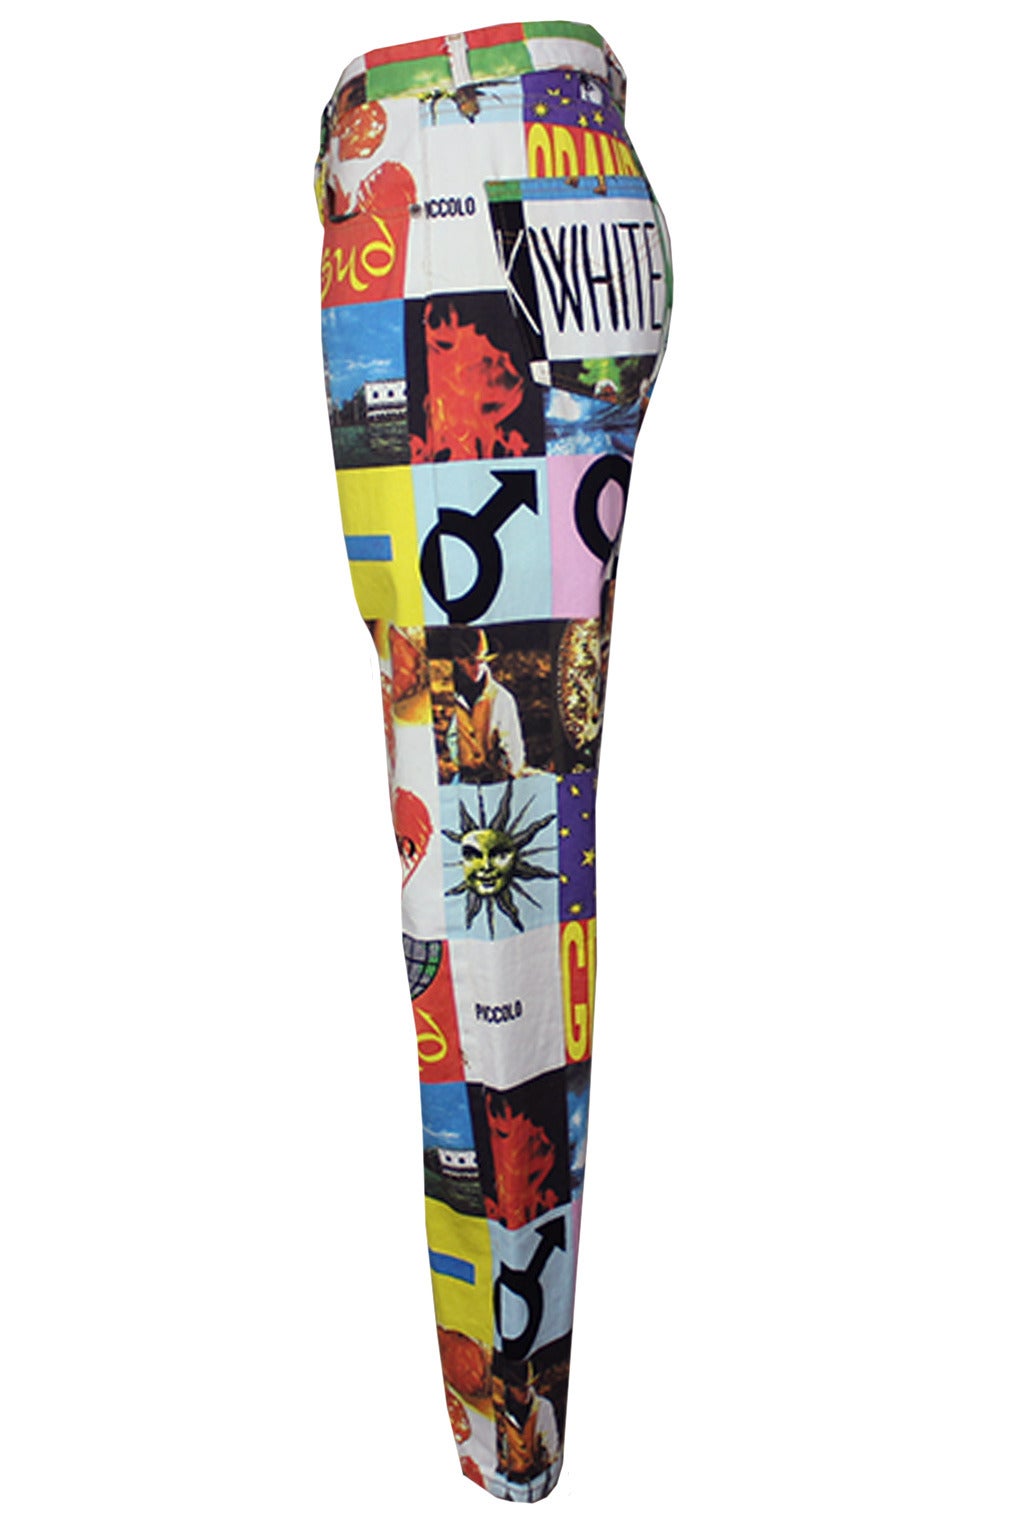 These cotton jeans feature an amusing photo print collage of everything from smiley faces to Italian landscapes, all in vibrant colors. The cut is classic western styling with three pockets in front and a back yoke with two patch pockets and a